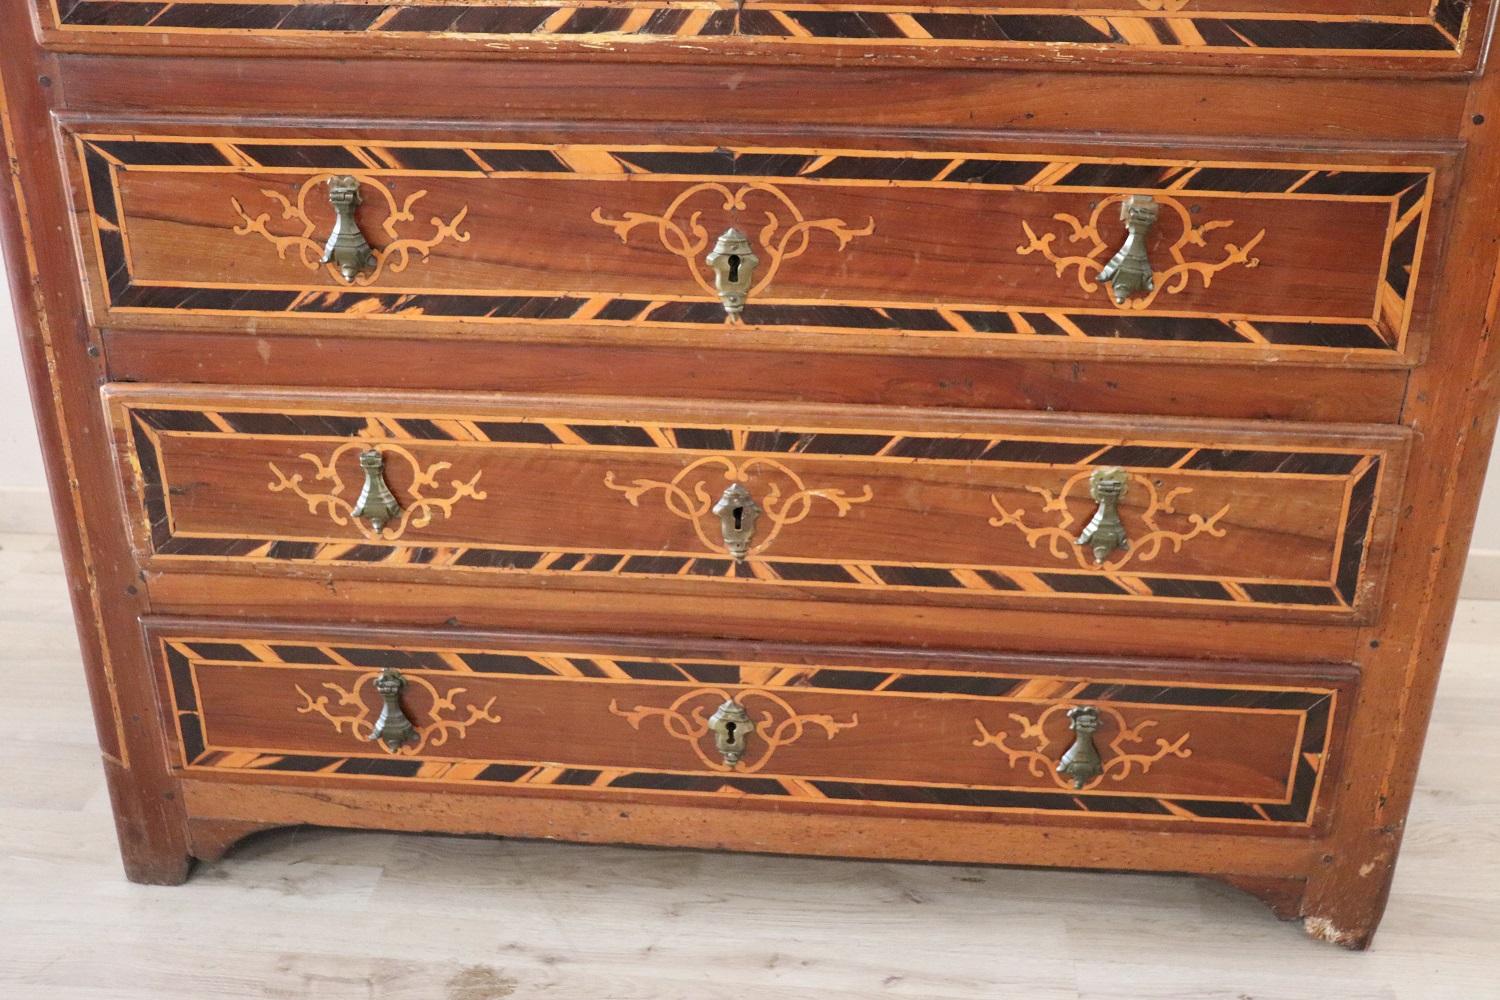 Inlay 17th Century Italian Louis XIV Walnut Inlaid Antique Commode or Chest of Drawers For Sale